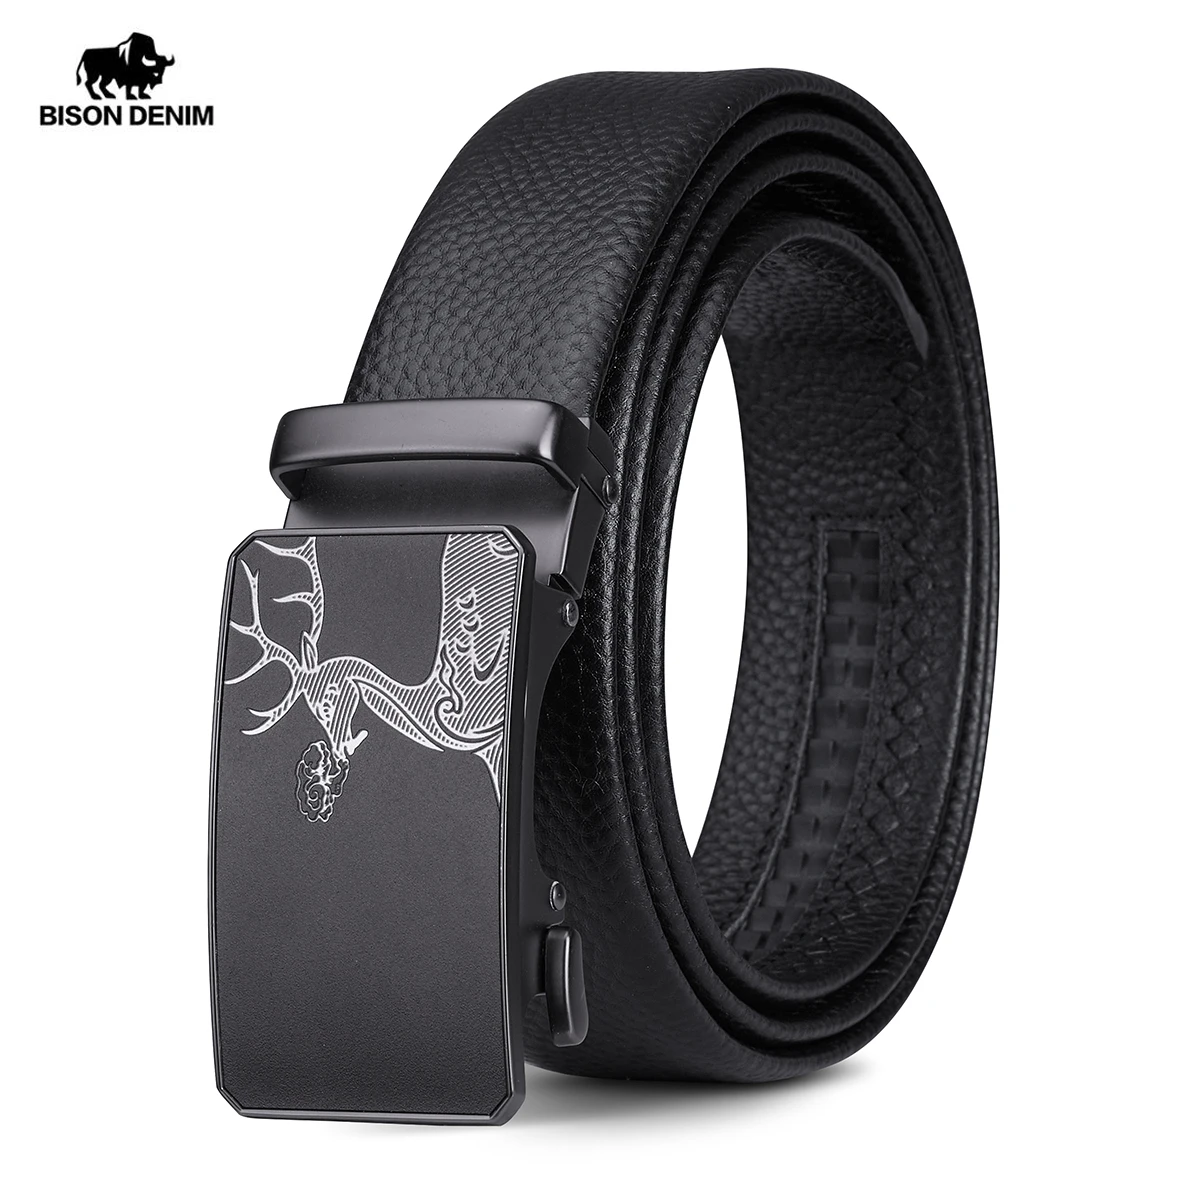 BISON DENIM Genuine Leather Men Belts Metal Automatic Buckle Brand High Quality Leather Belts for Men Famous Brand Luxury Strap